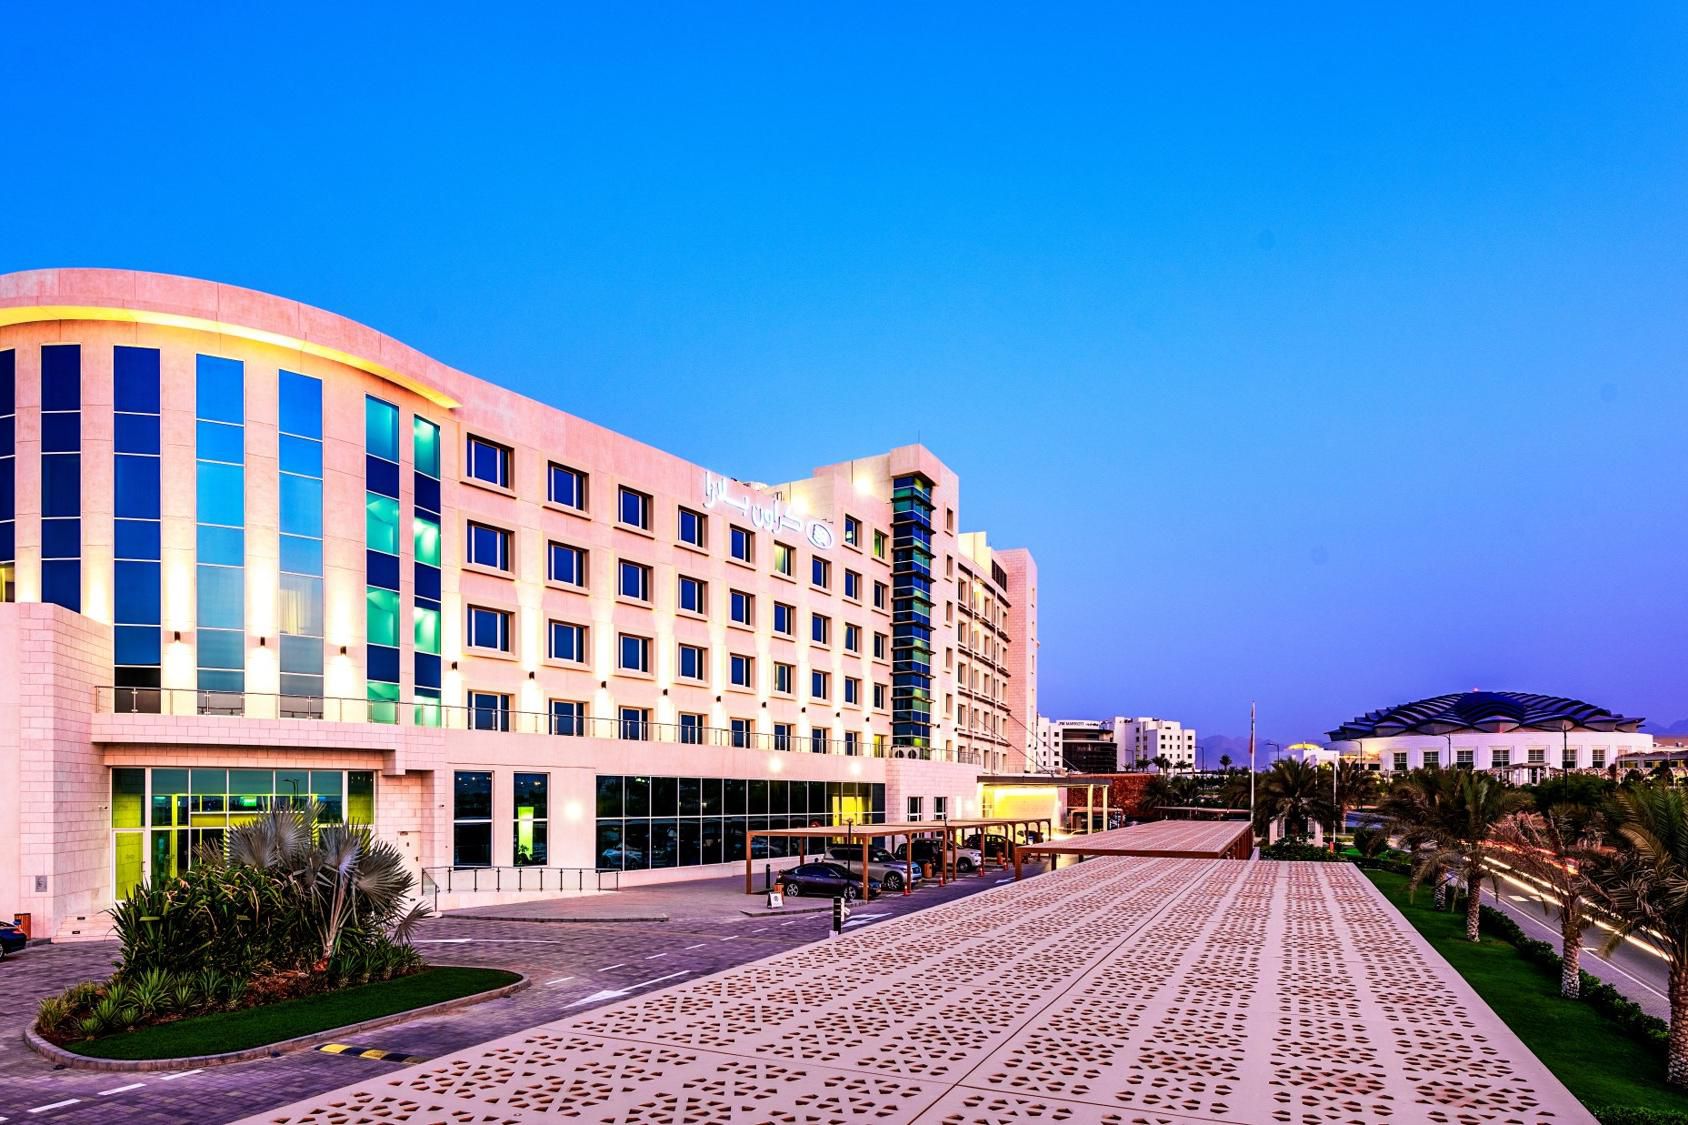 Located within a walking distance from Oman Convention Centre